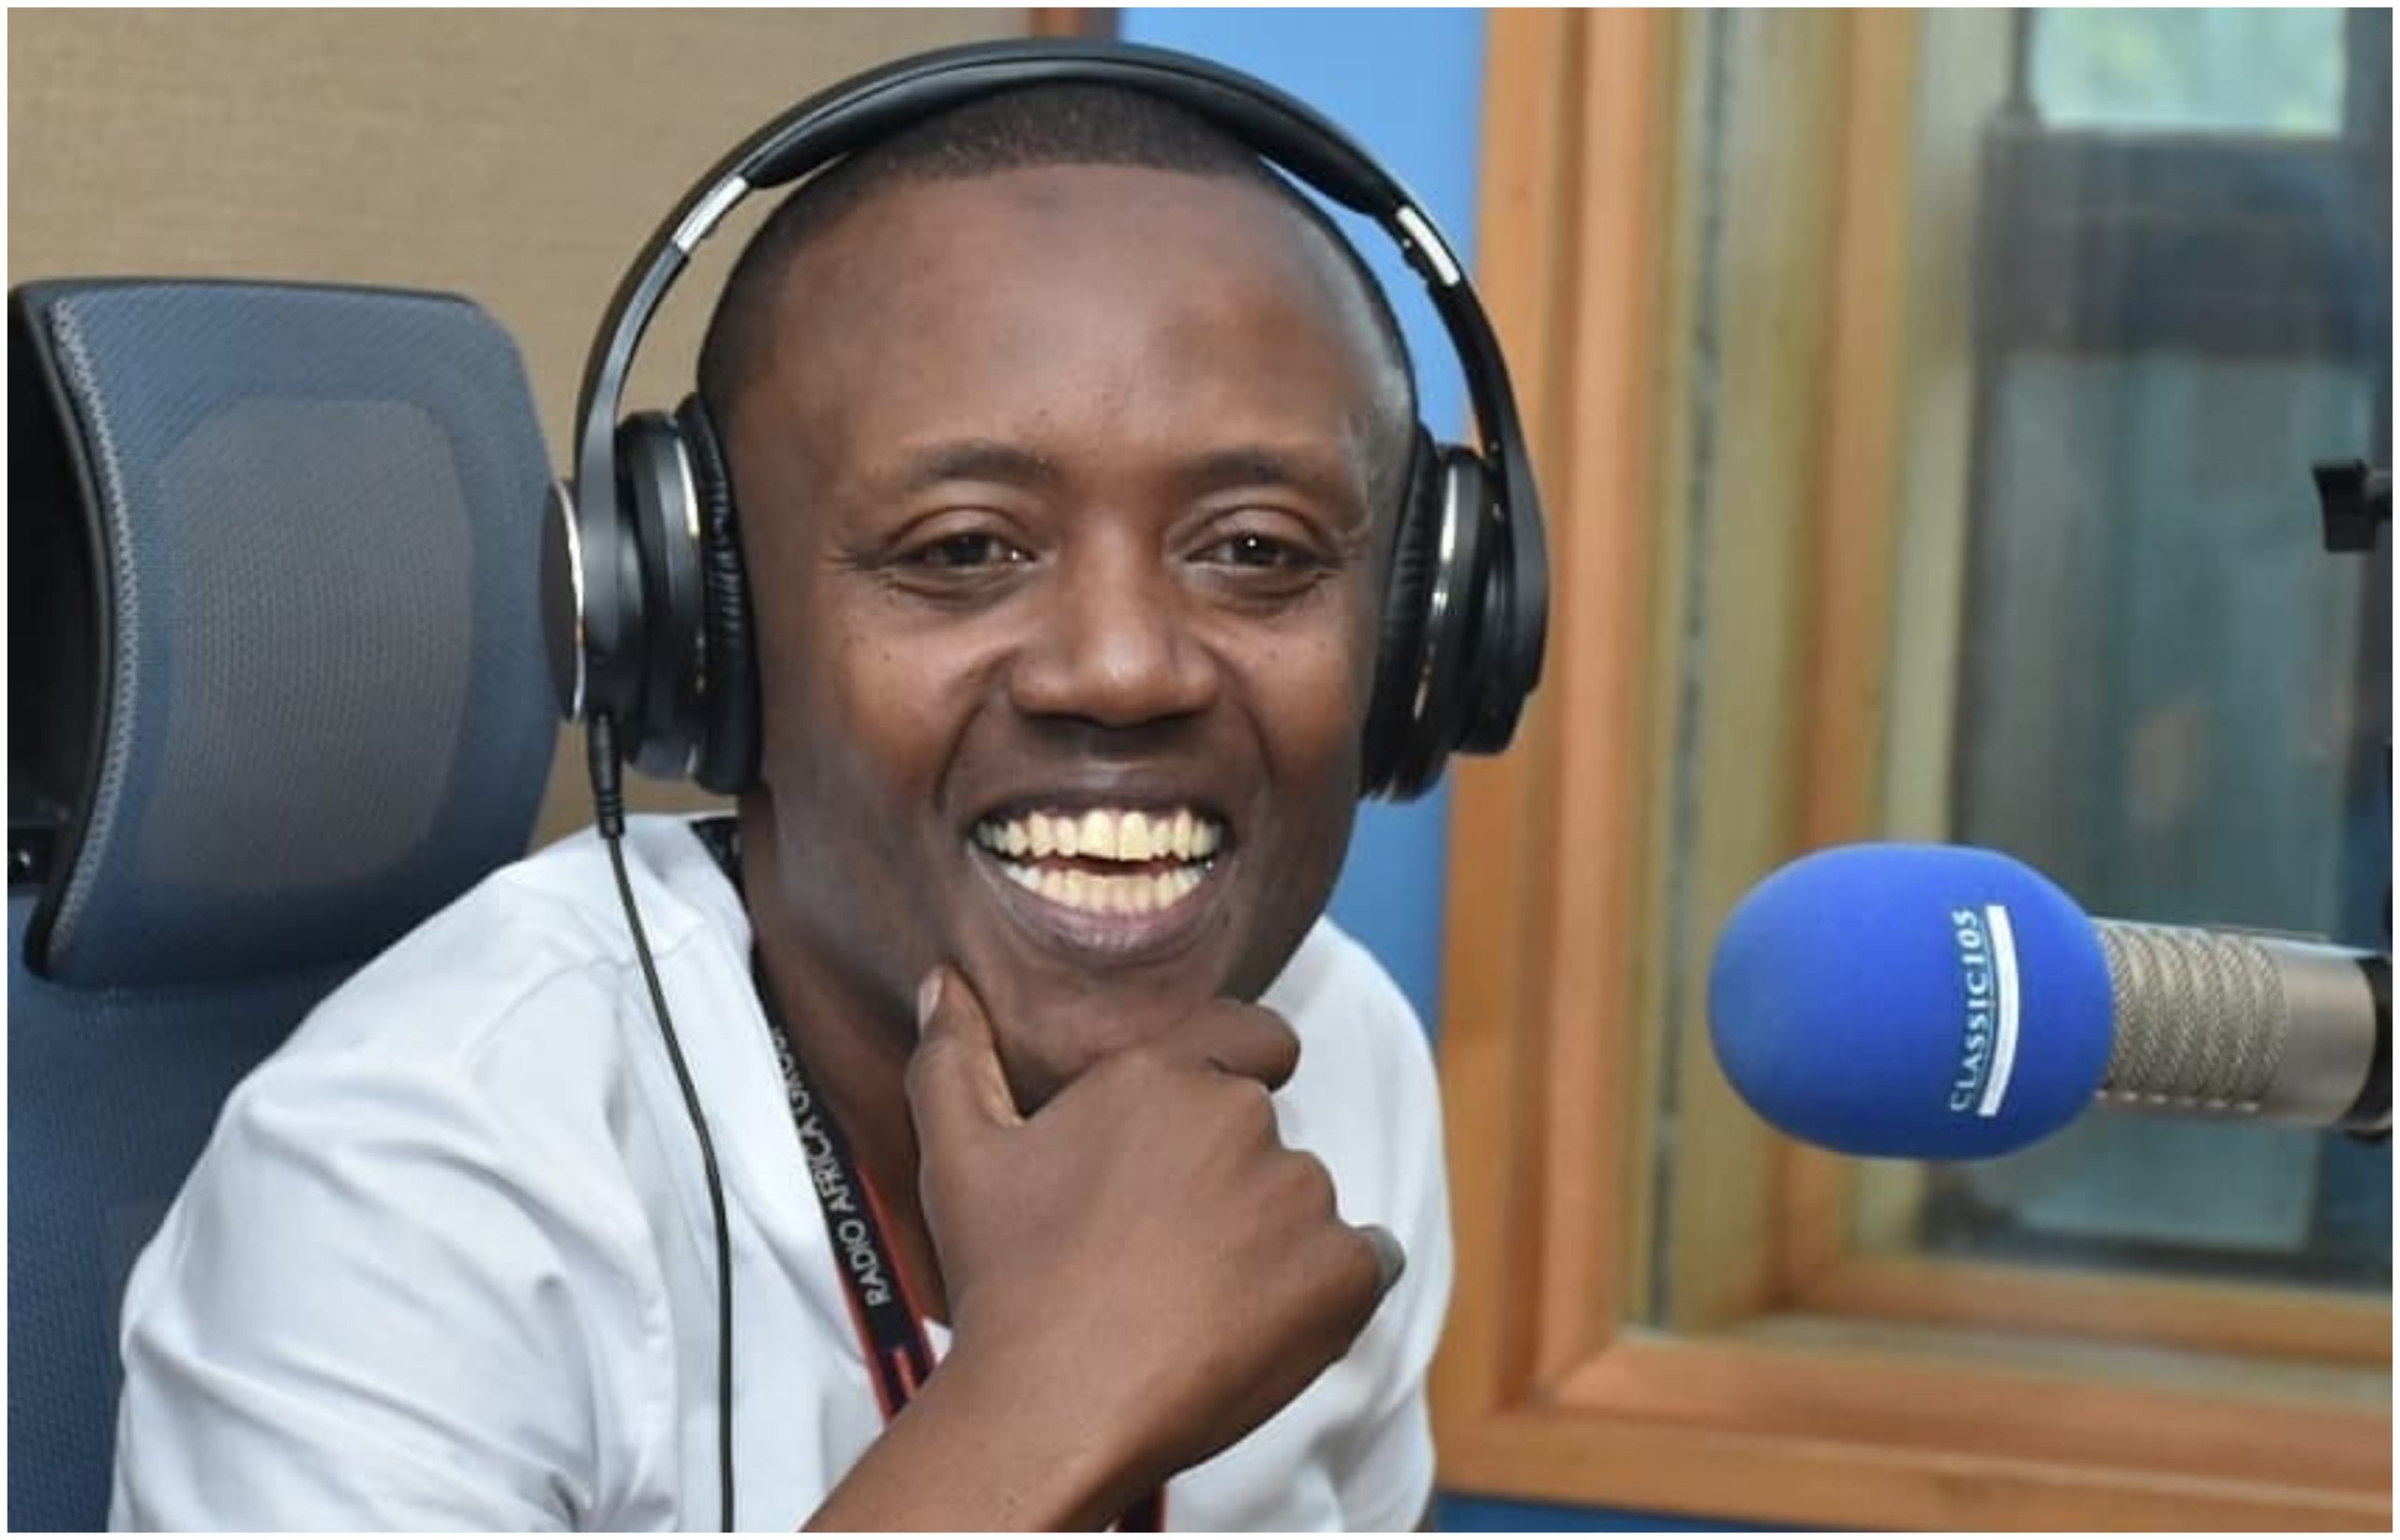 “My heart and body want you,” woman thirsts after Maina Kageni on live radio